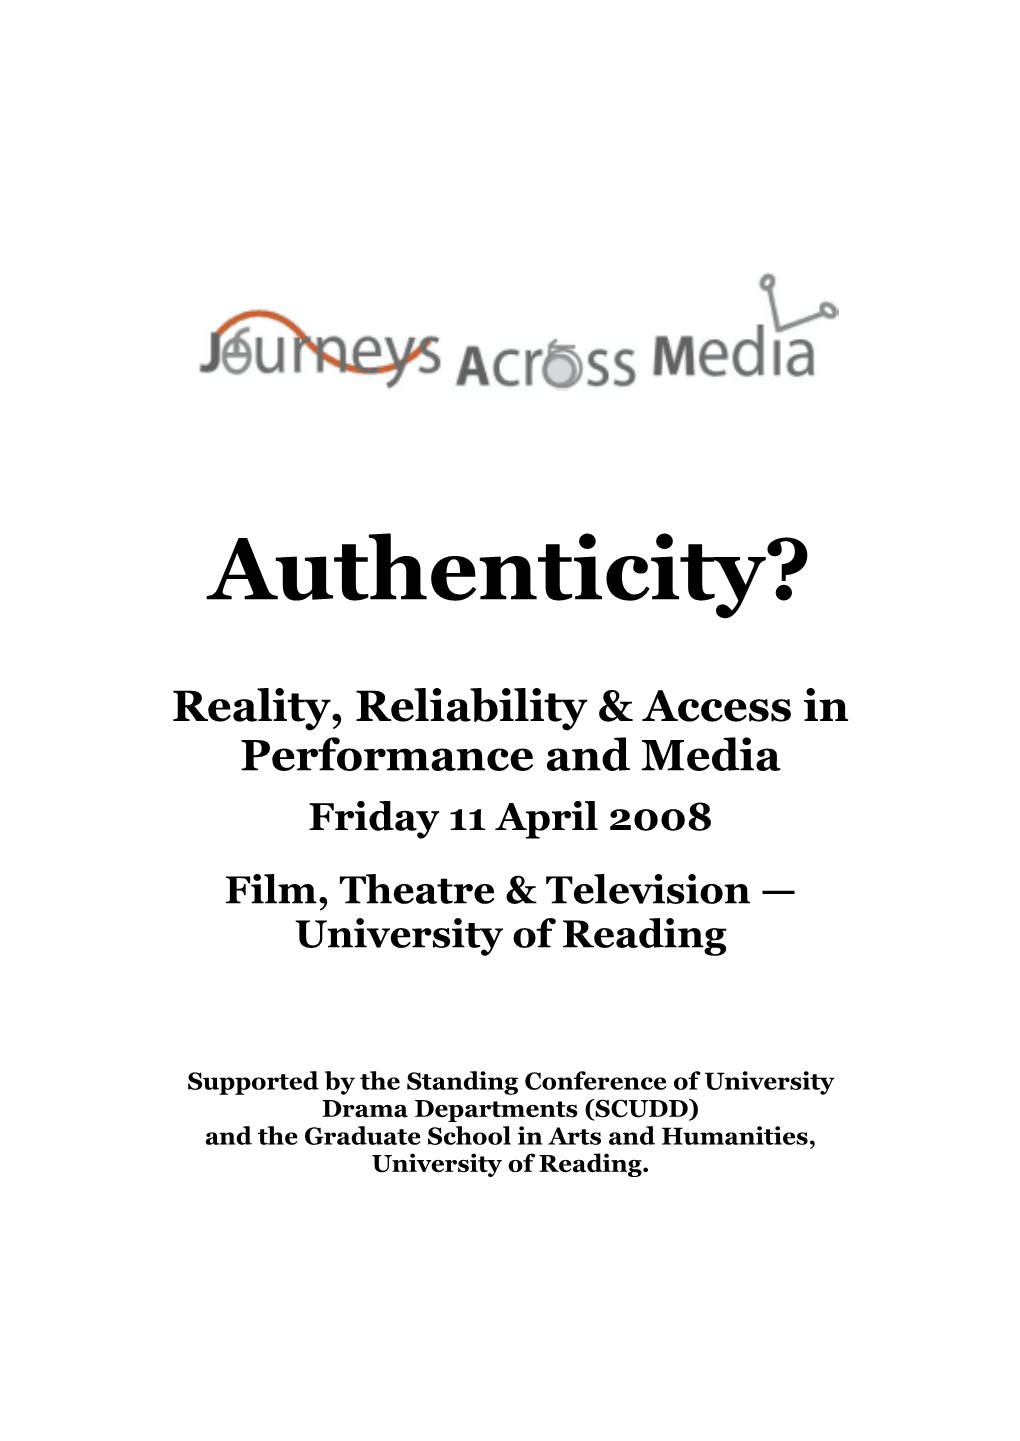 Reality, Reliability & Access in Performance and Media